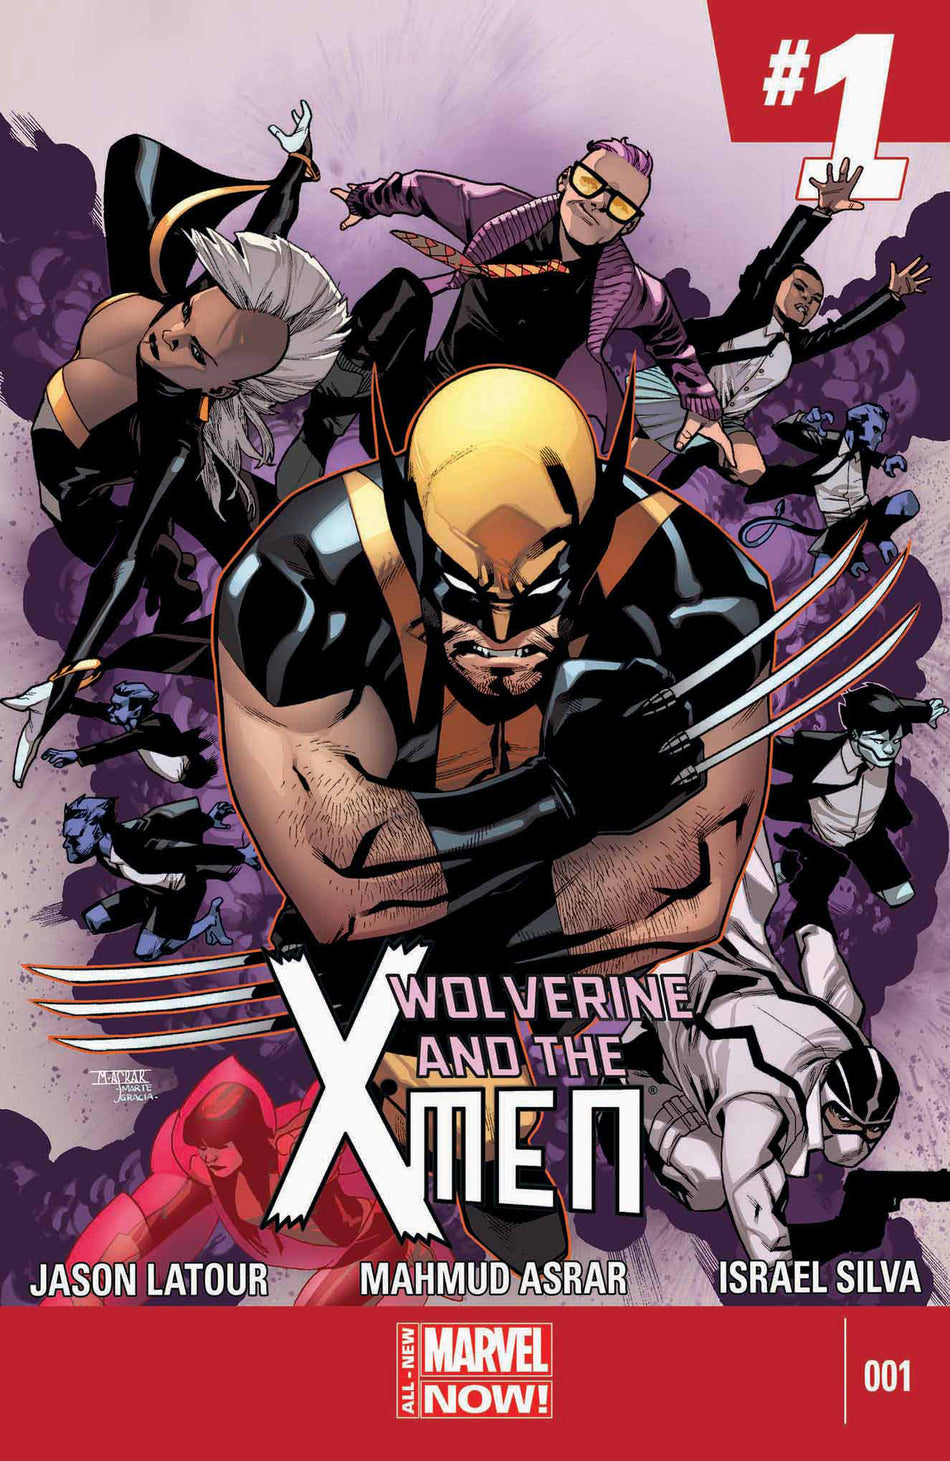 Photo of Wolverine & X-Men Issue 1 Anmn comic sold by Stronghold Collectibles